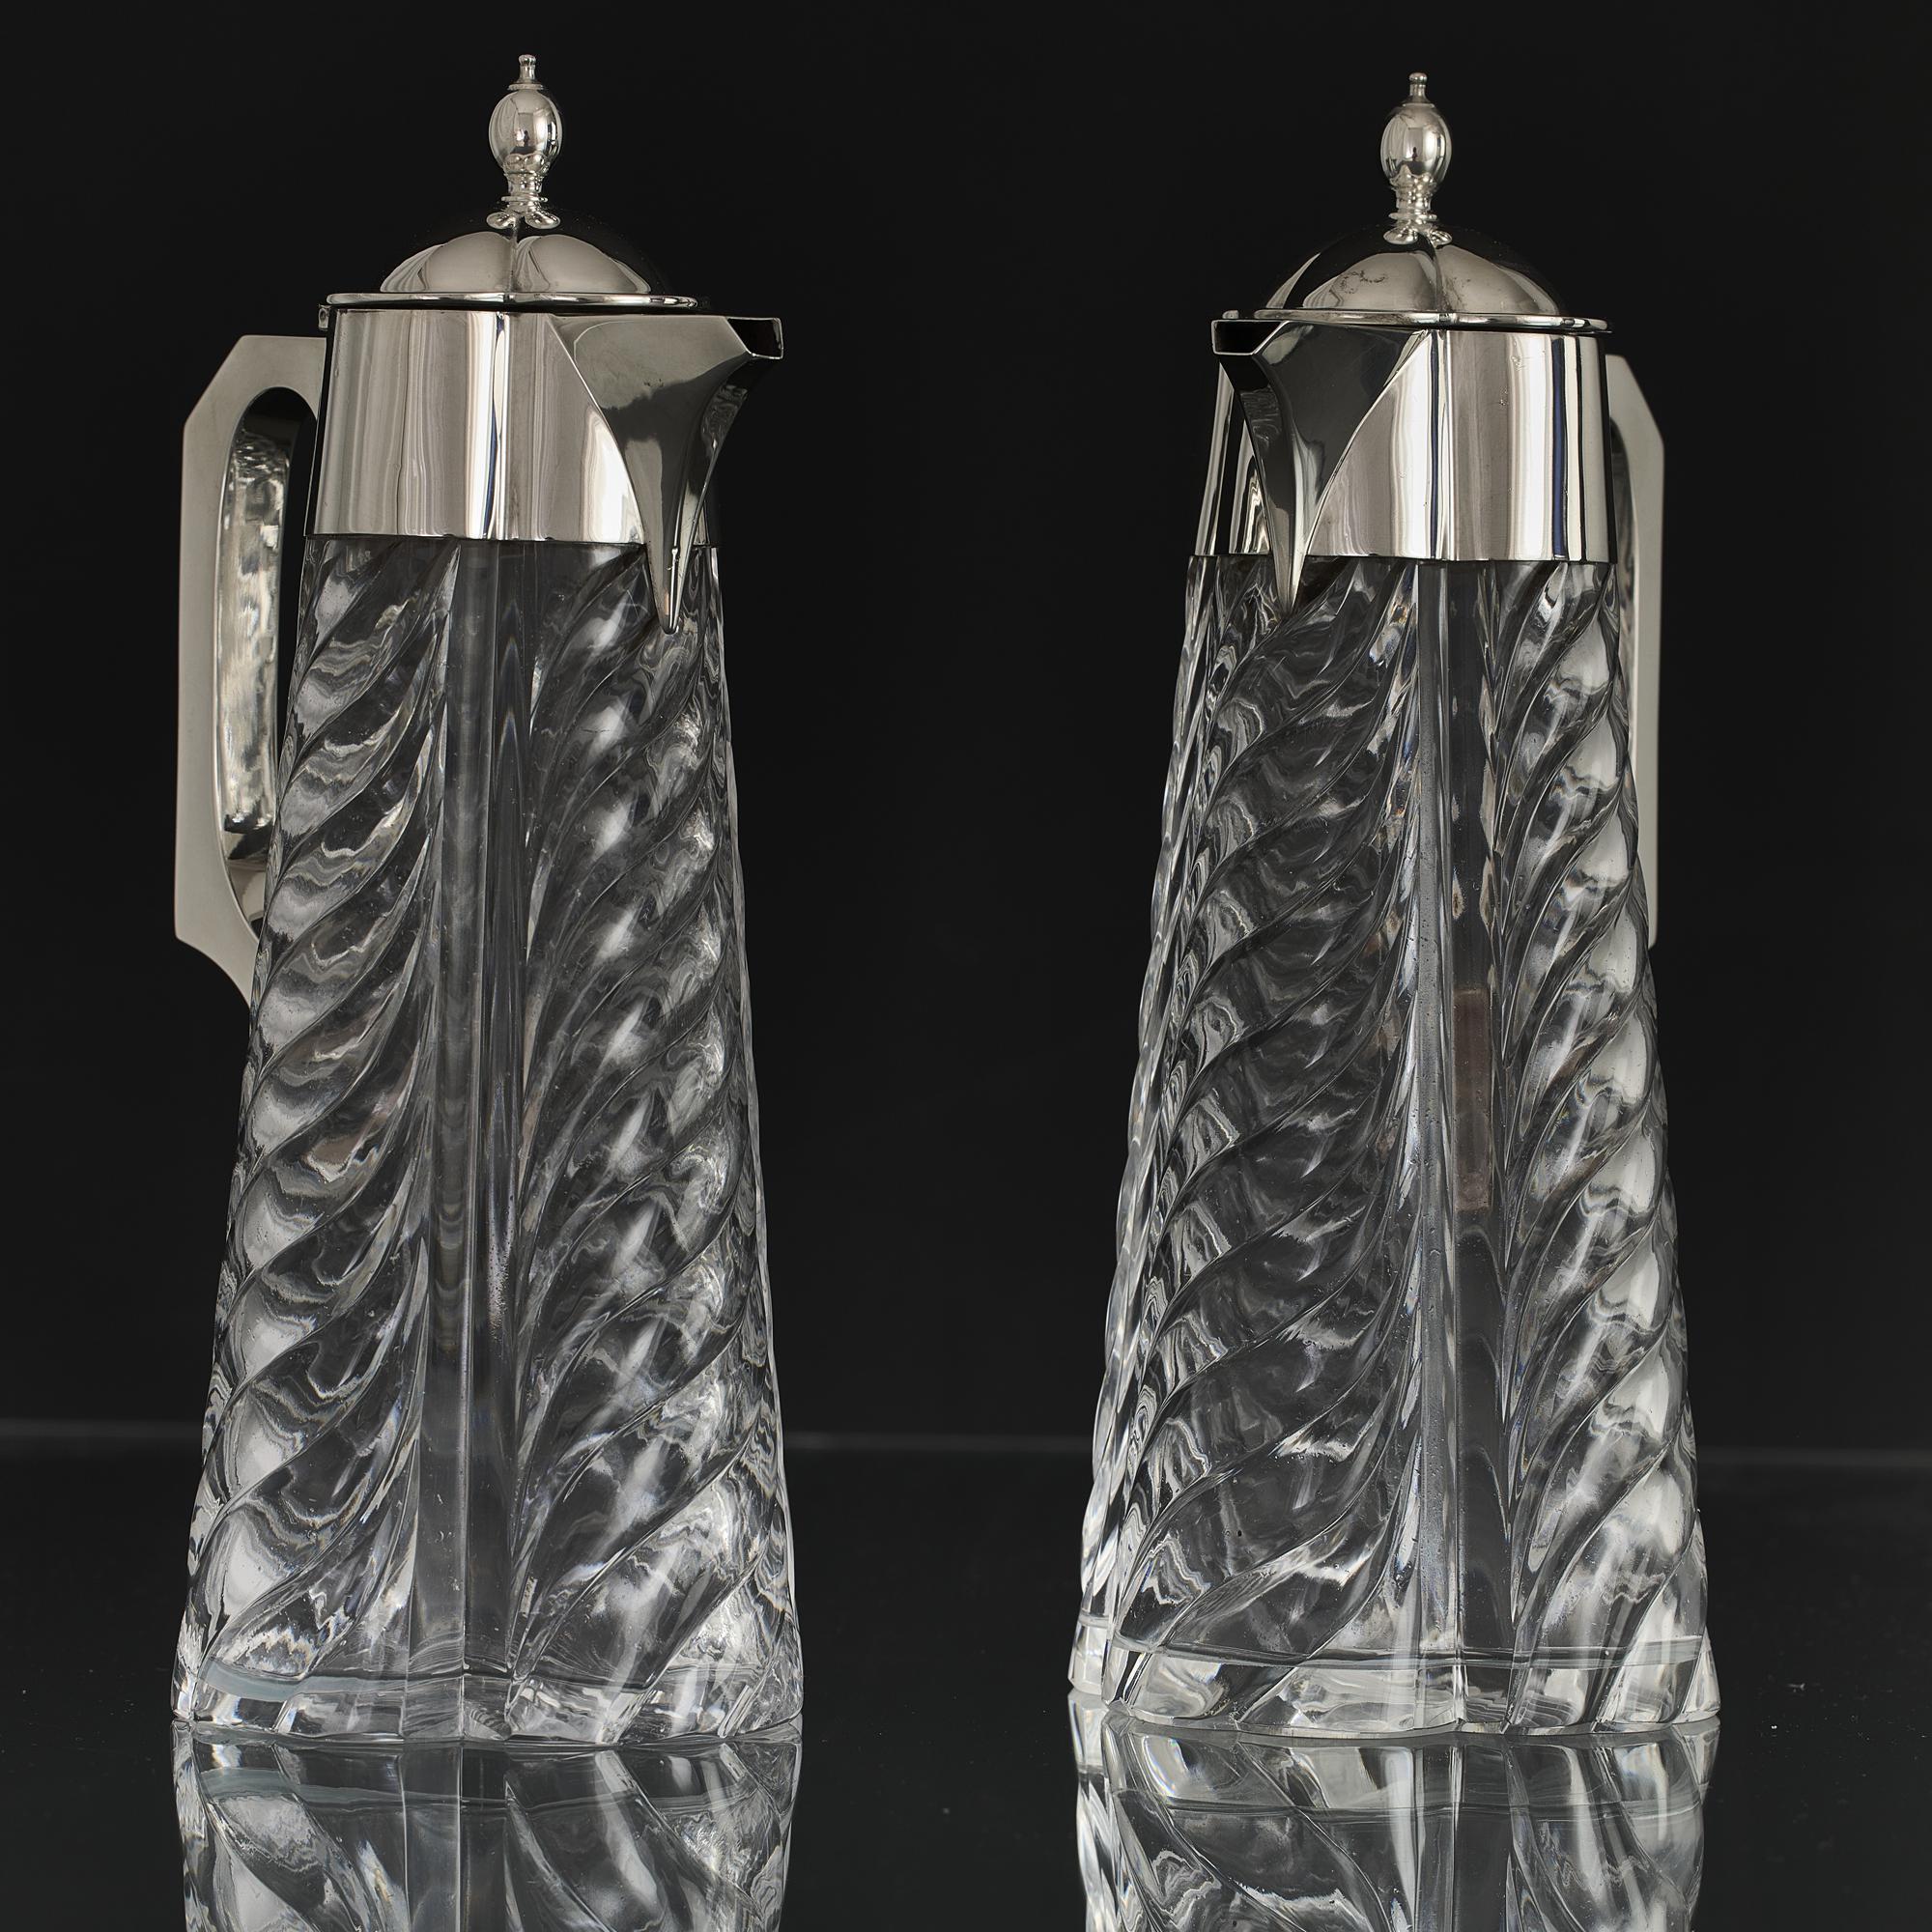 Pair of fine quality late-Victorian antique wine jugs with hand-blown quadra-form glass bodies deeply cut with swirling fluted decoration. The jugs are of a rare design that is both elegant and functional with each holding a bottle of wine. Each jug